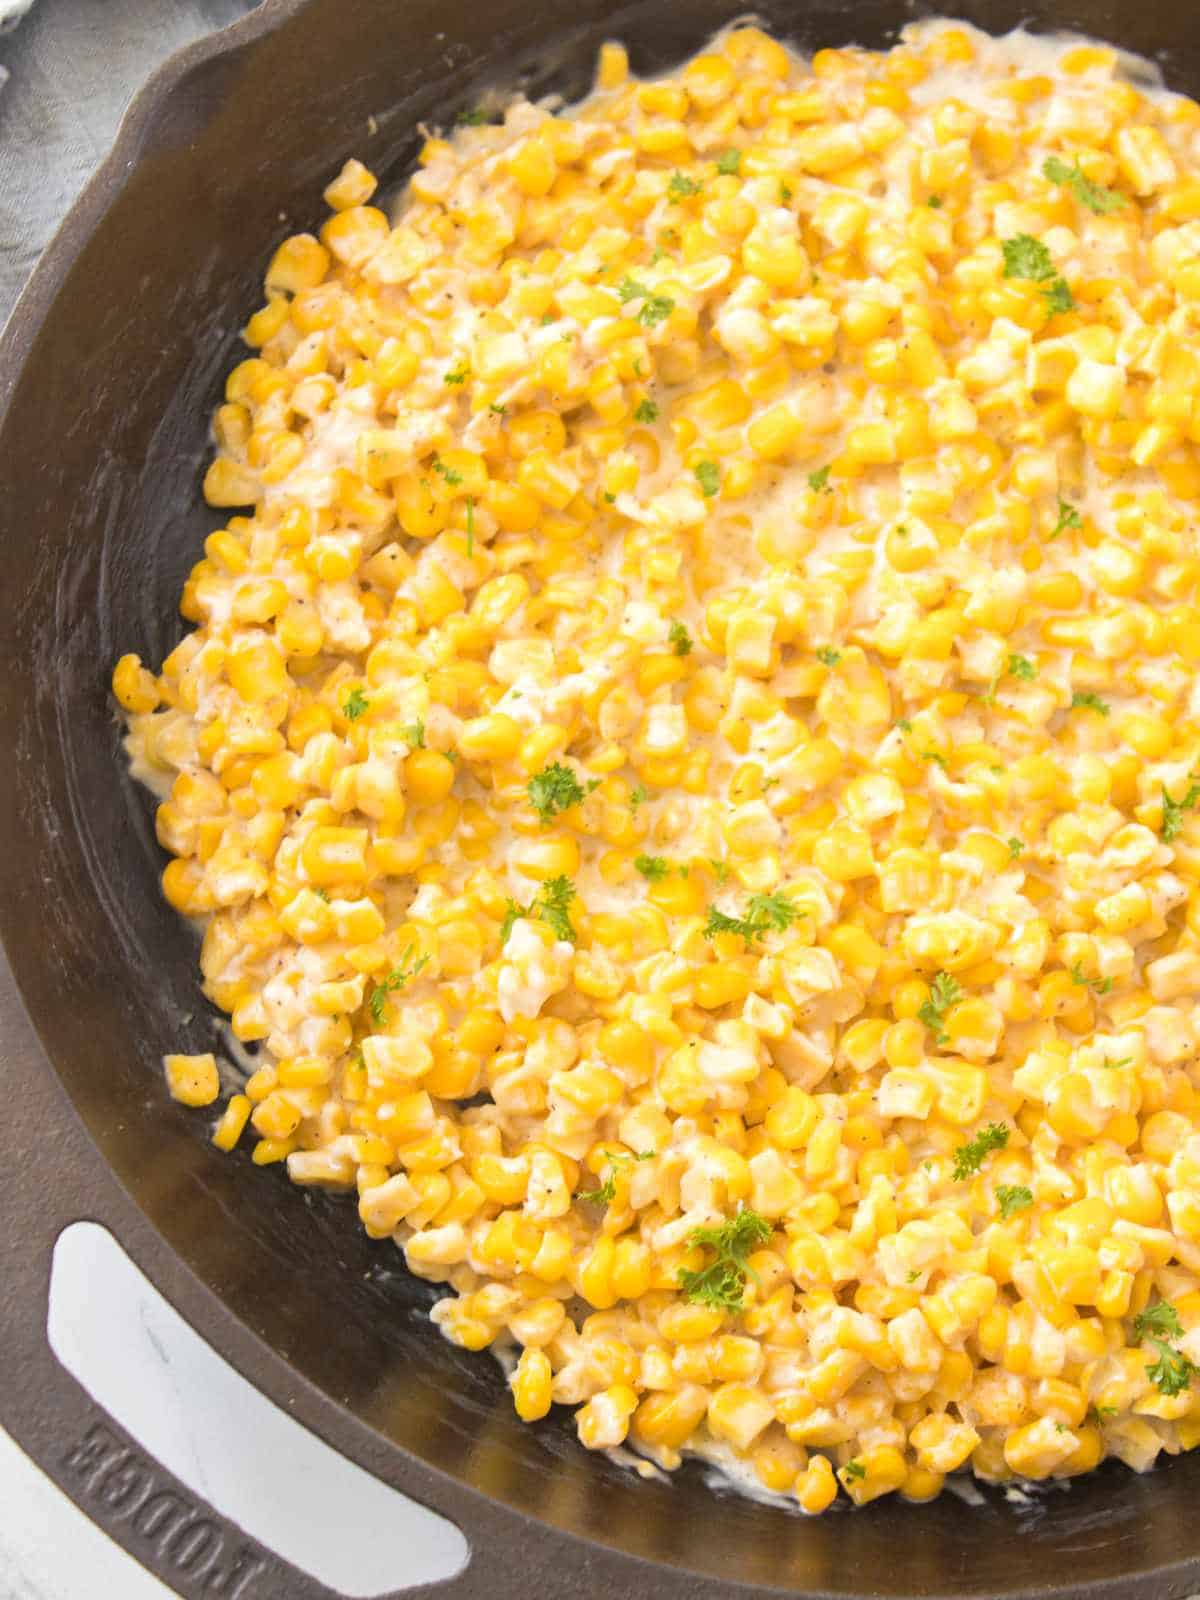 Creamy corn with spices and parsley garnish in a cast iron skillet.